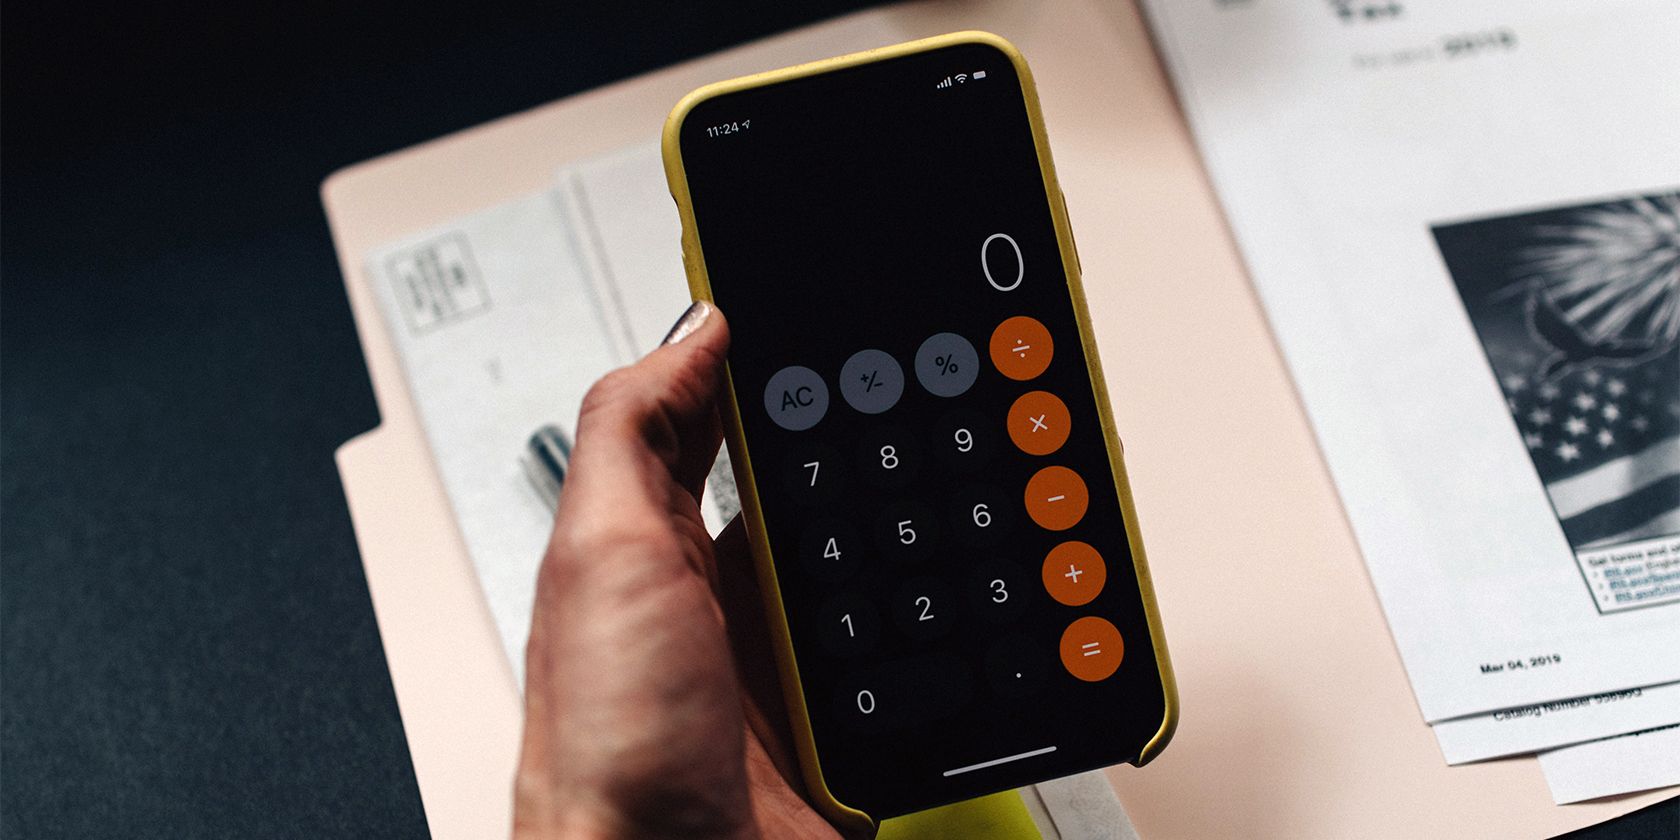 8 iPhone Calculator Secrets You Need to Know